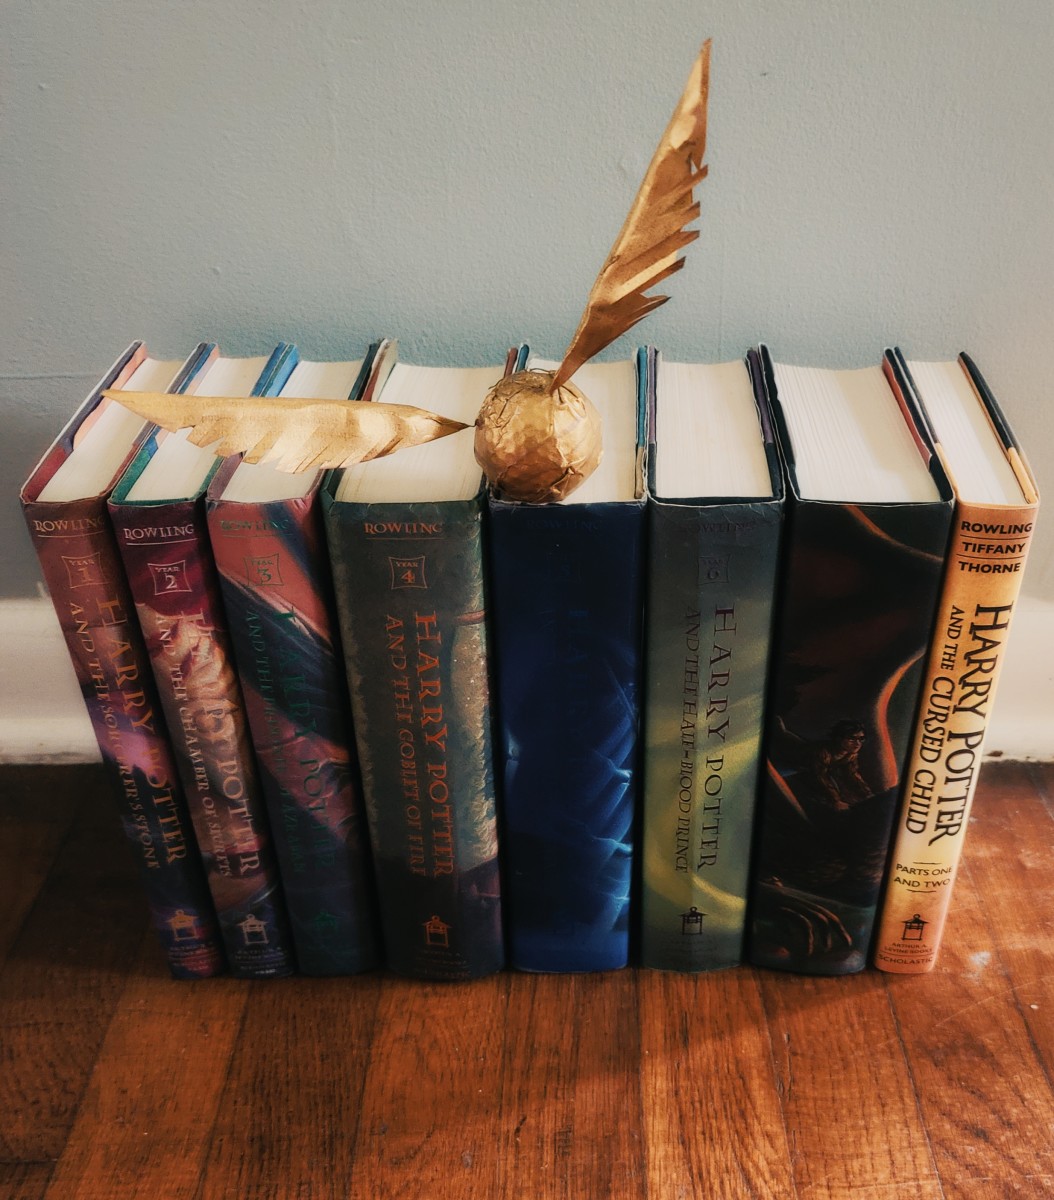 How to Make a Golden Snitch From Harry Potter